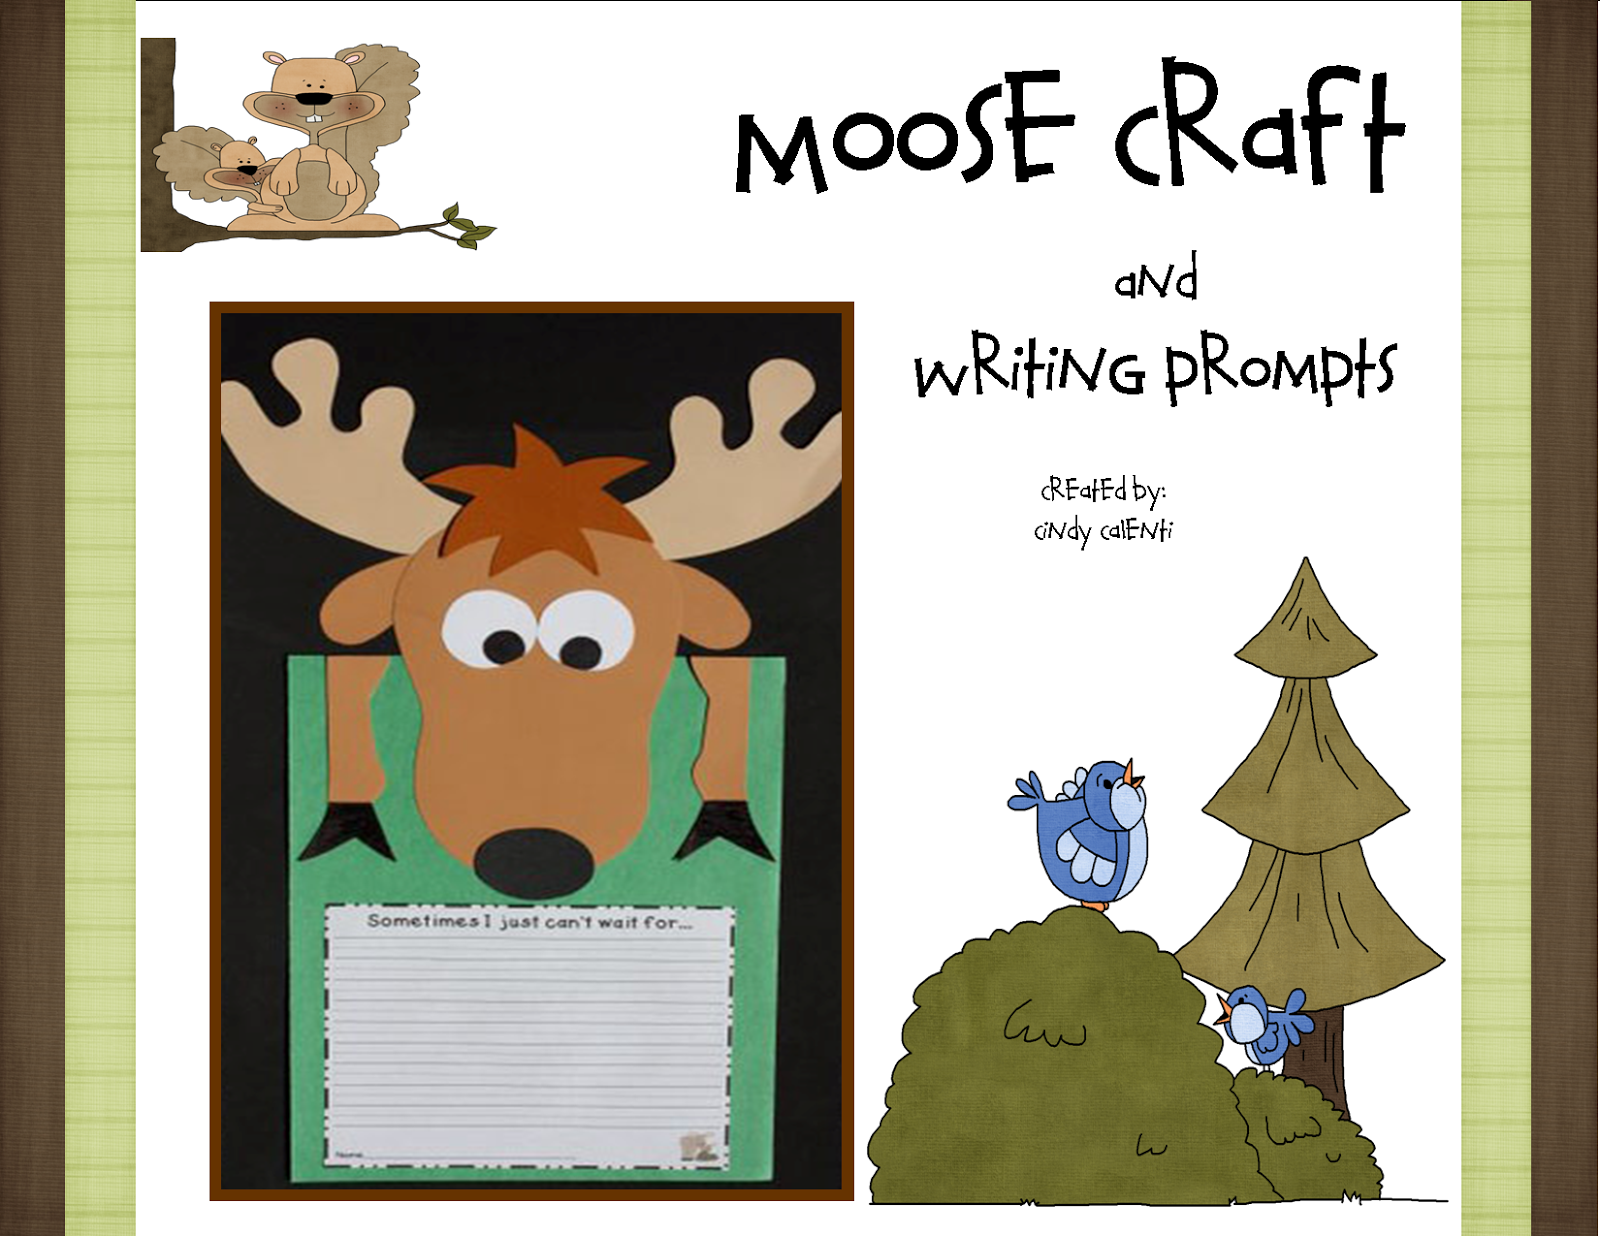 http://www.teacherspayteachers.com/Product/Camping-Moose-Craft-and-Writing-Prompts-555246